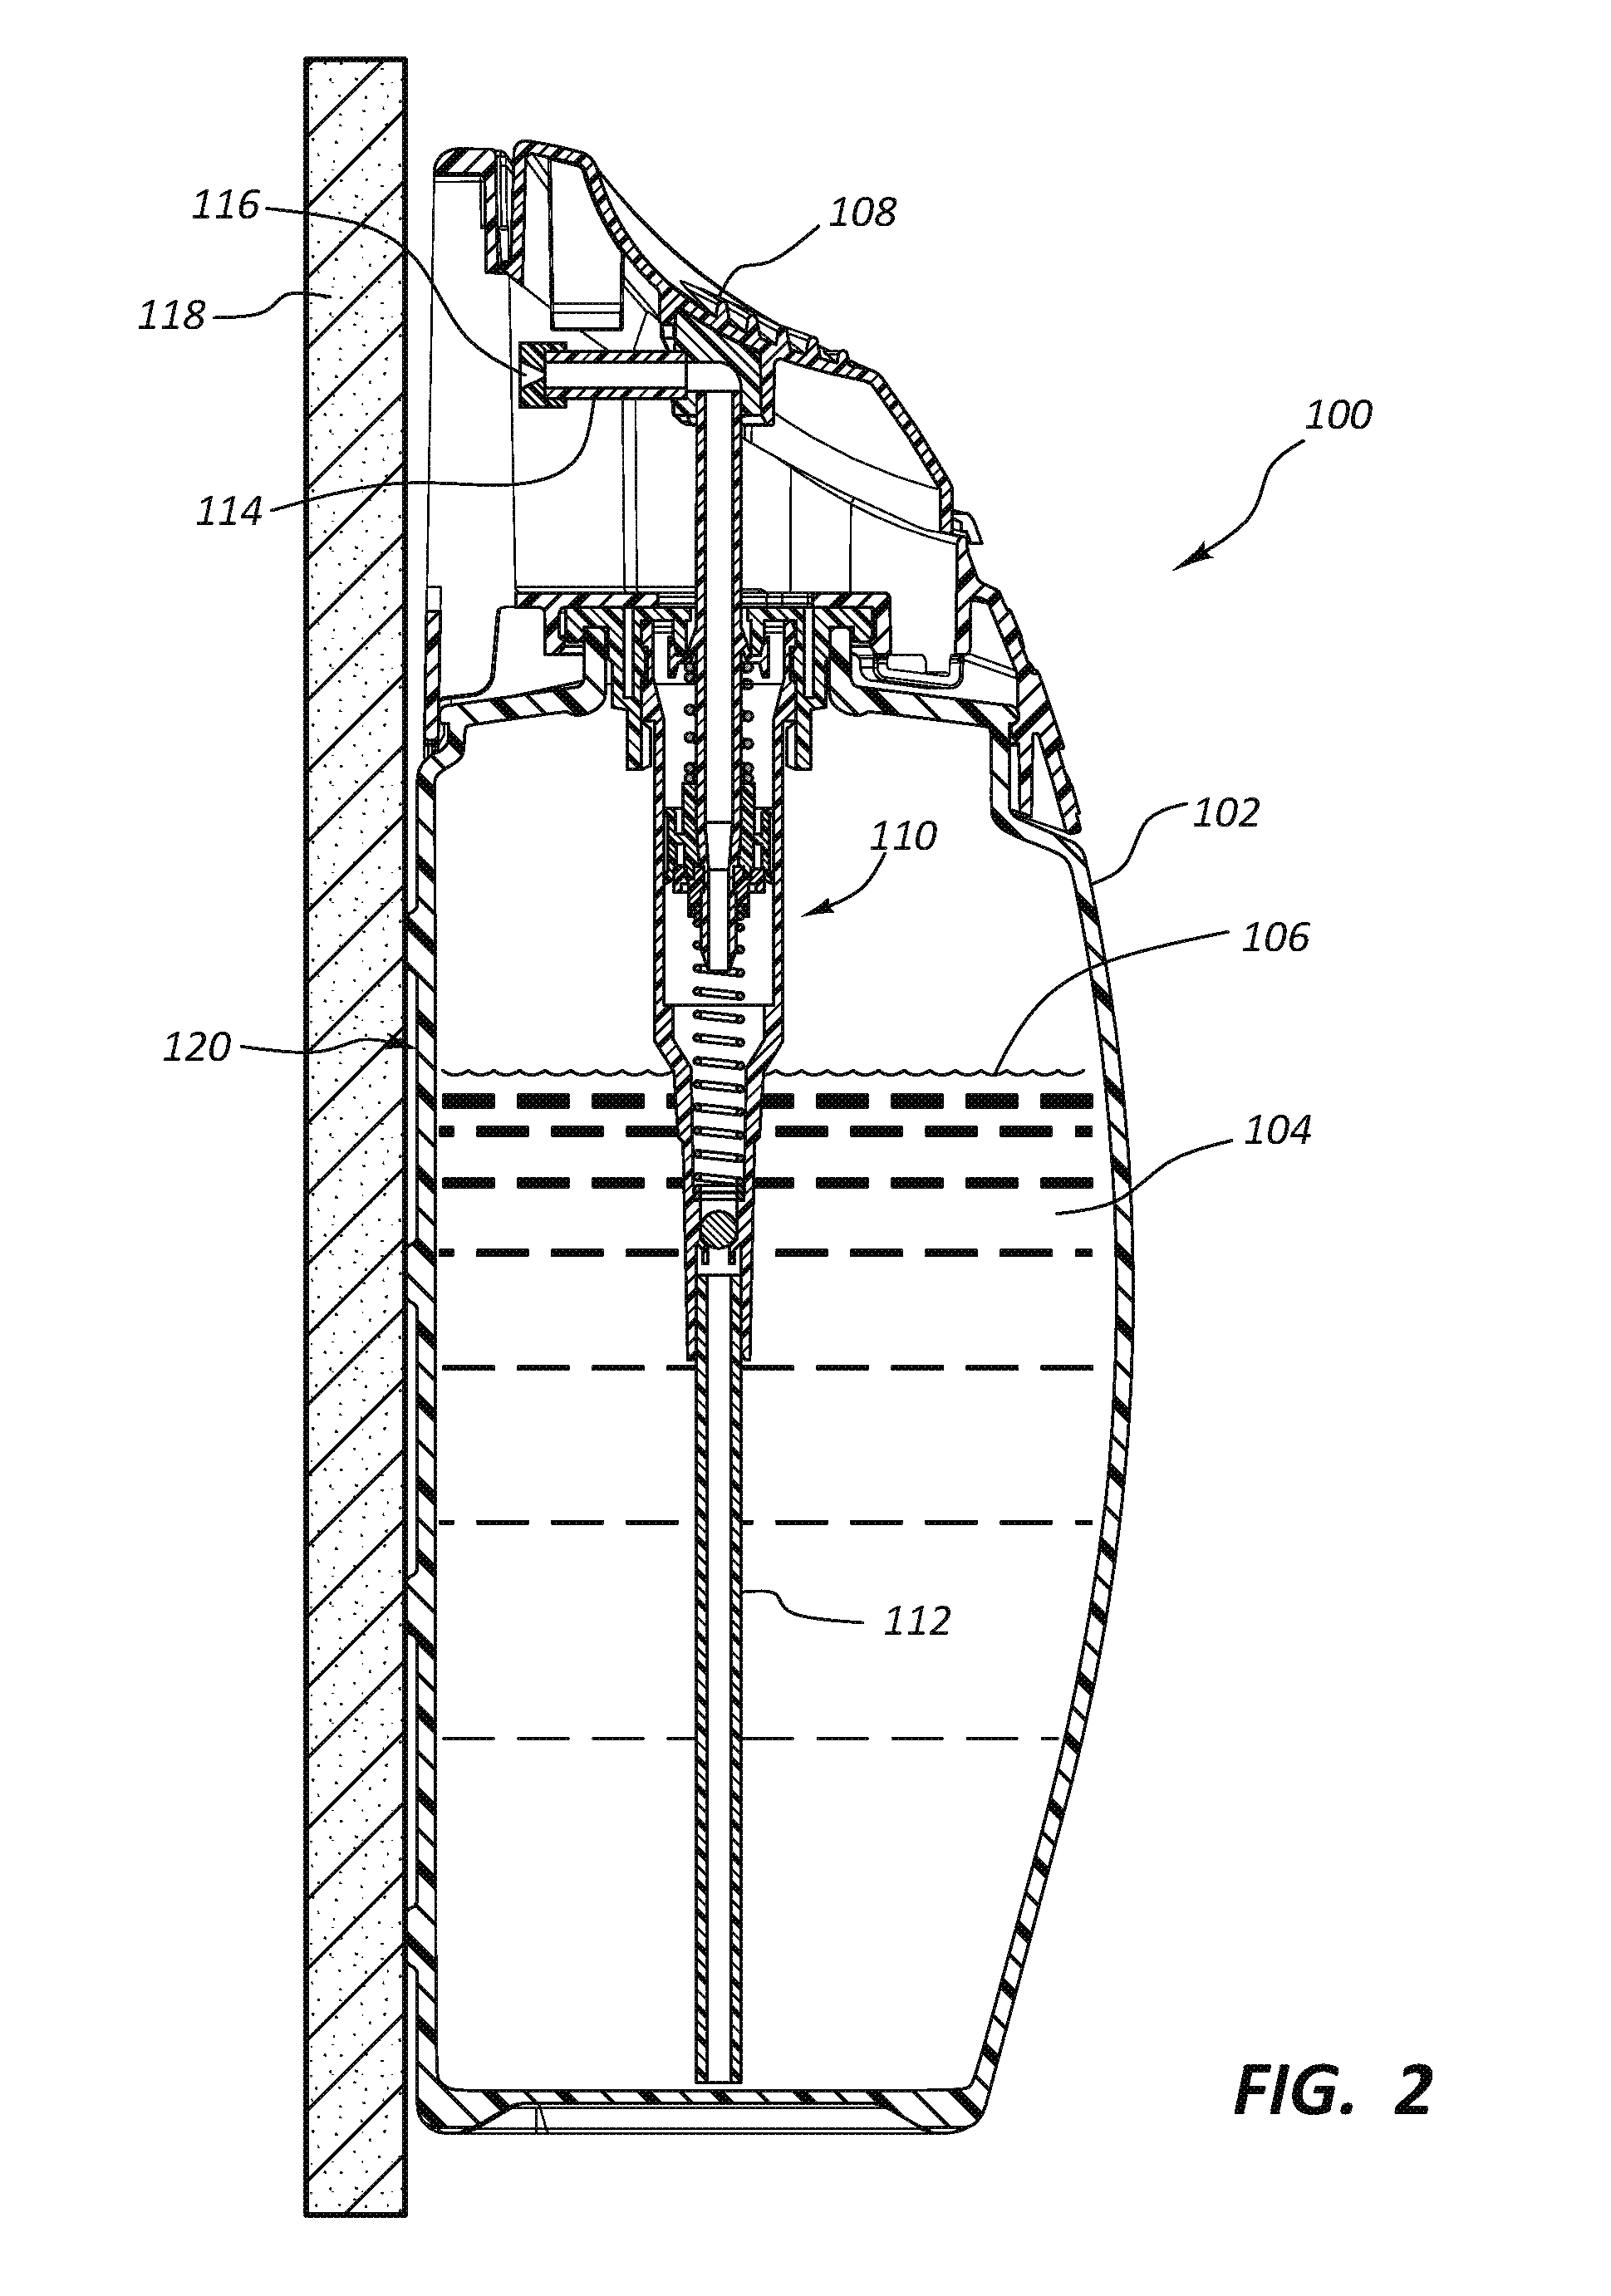 All-in-one scrubbing tool with hook for substrate attachment